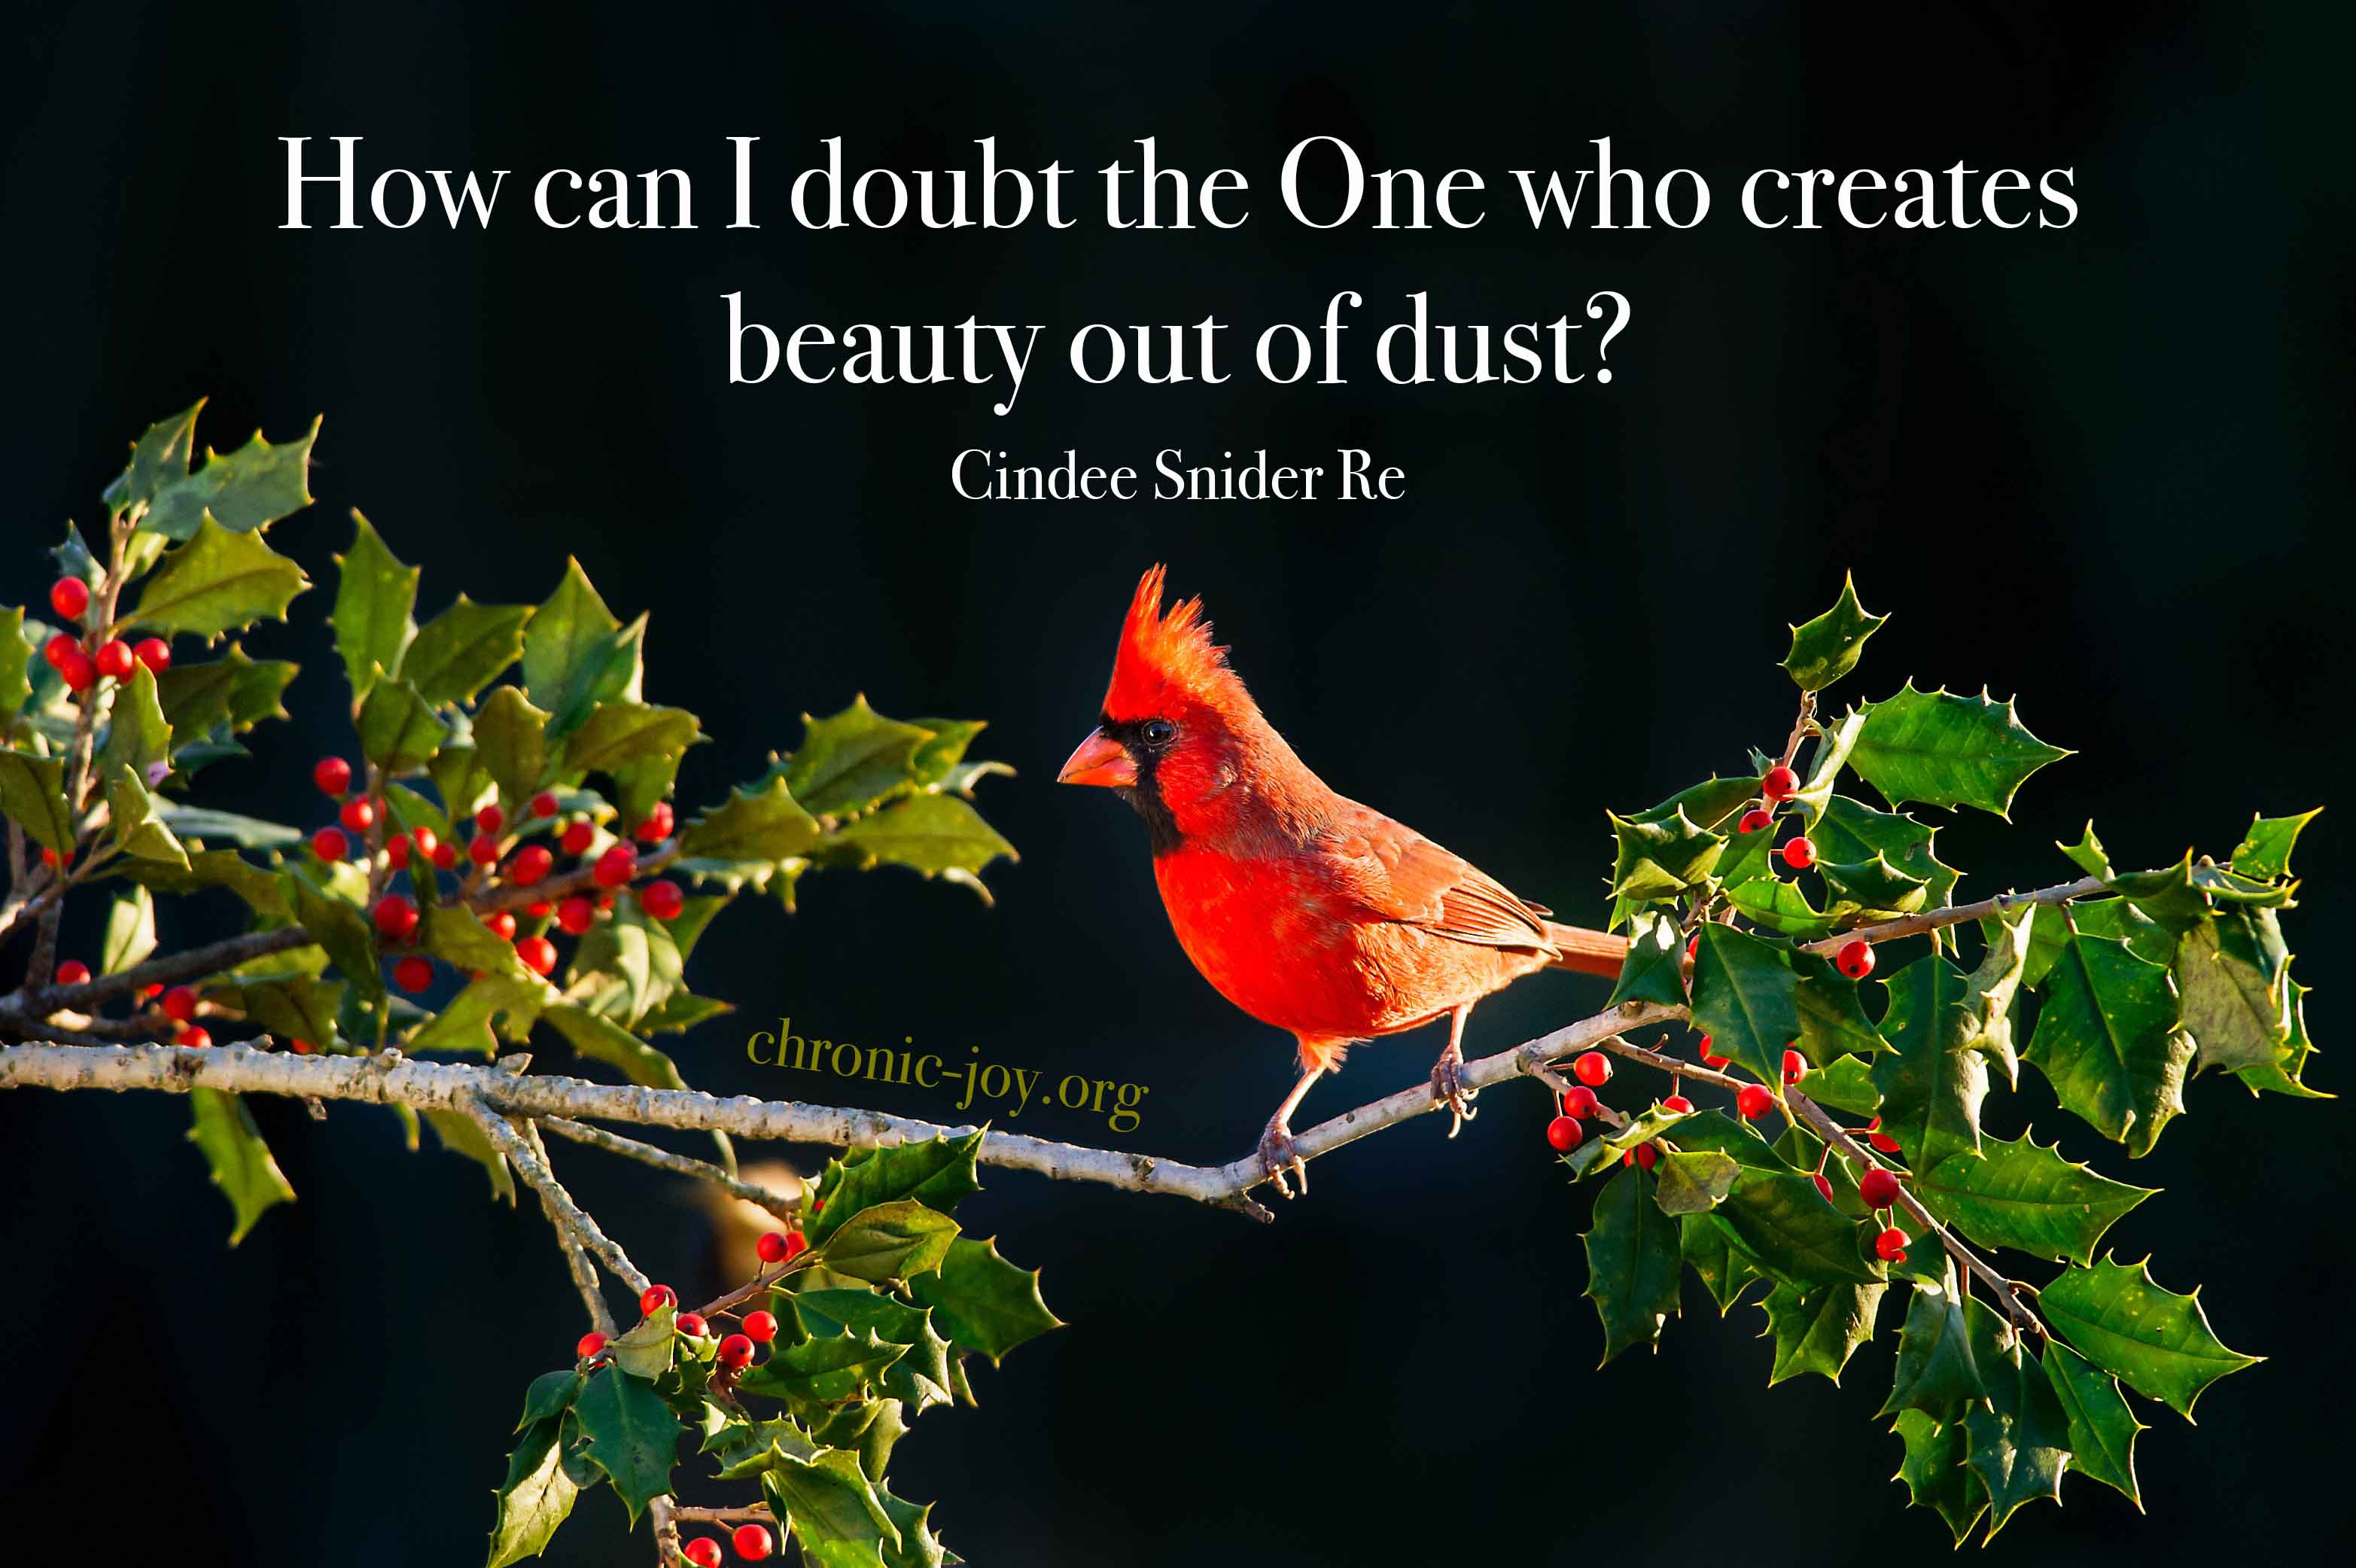 God creates beauty out of dust.